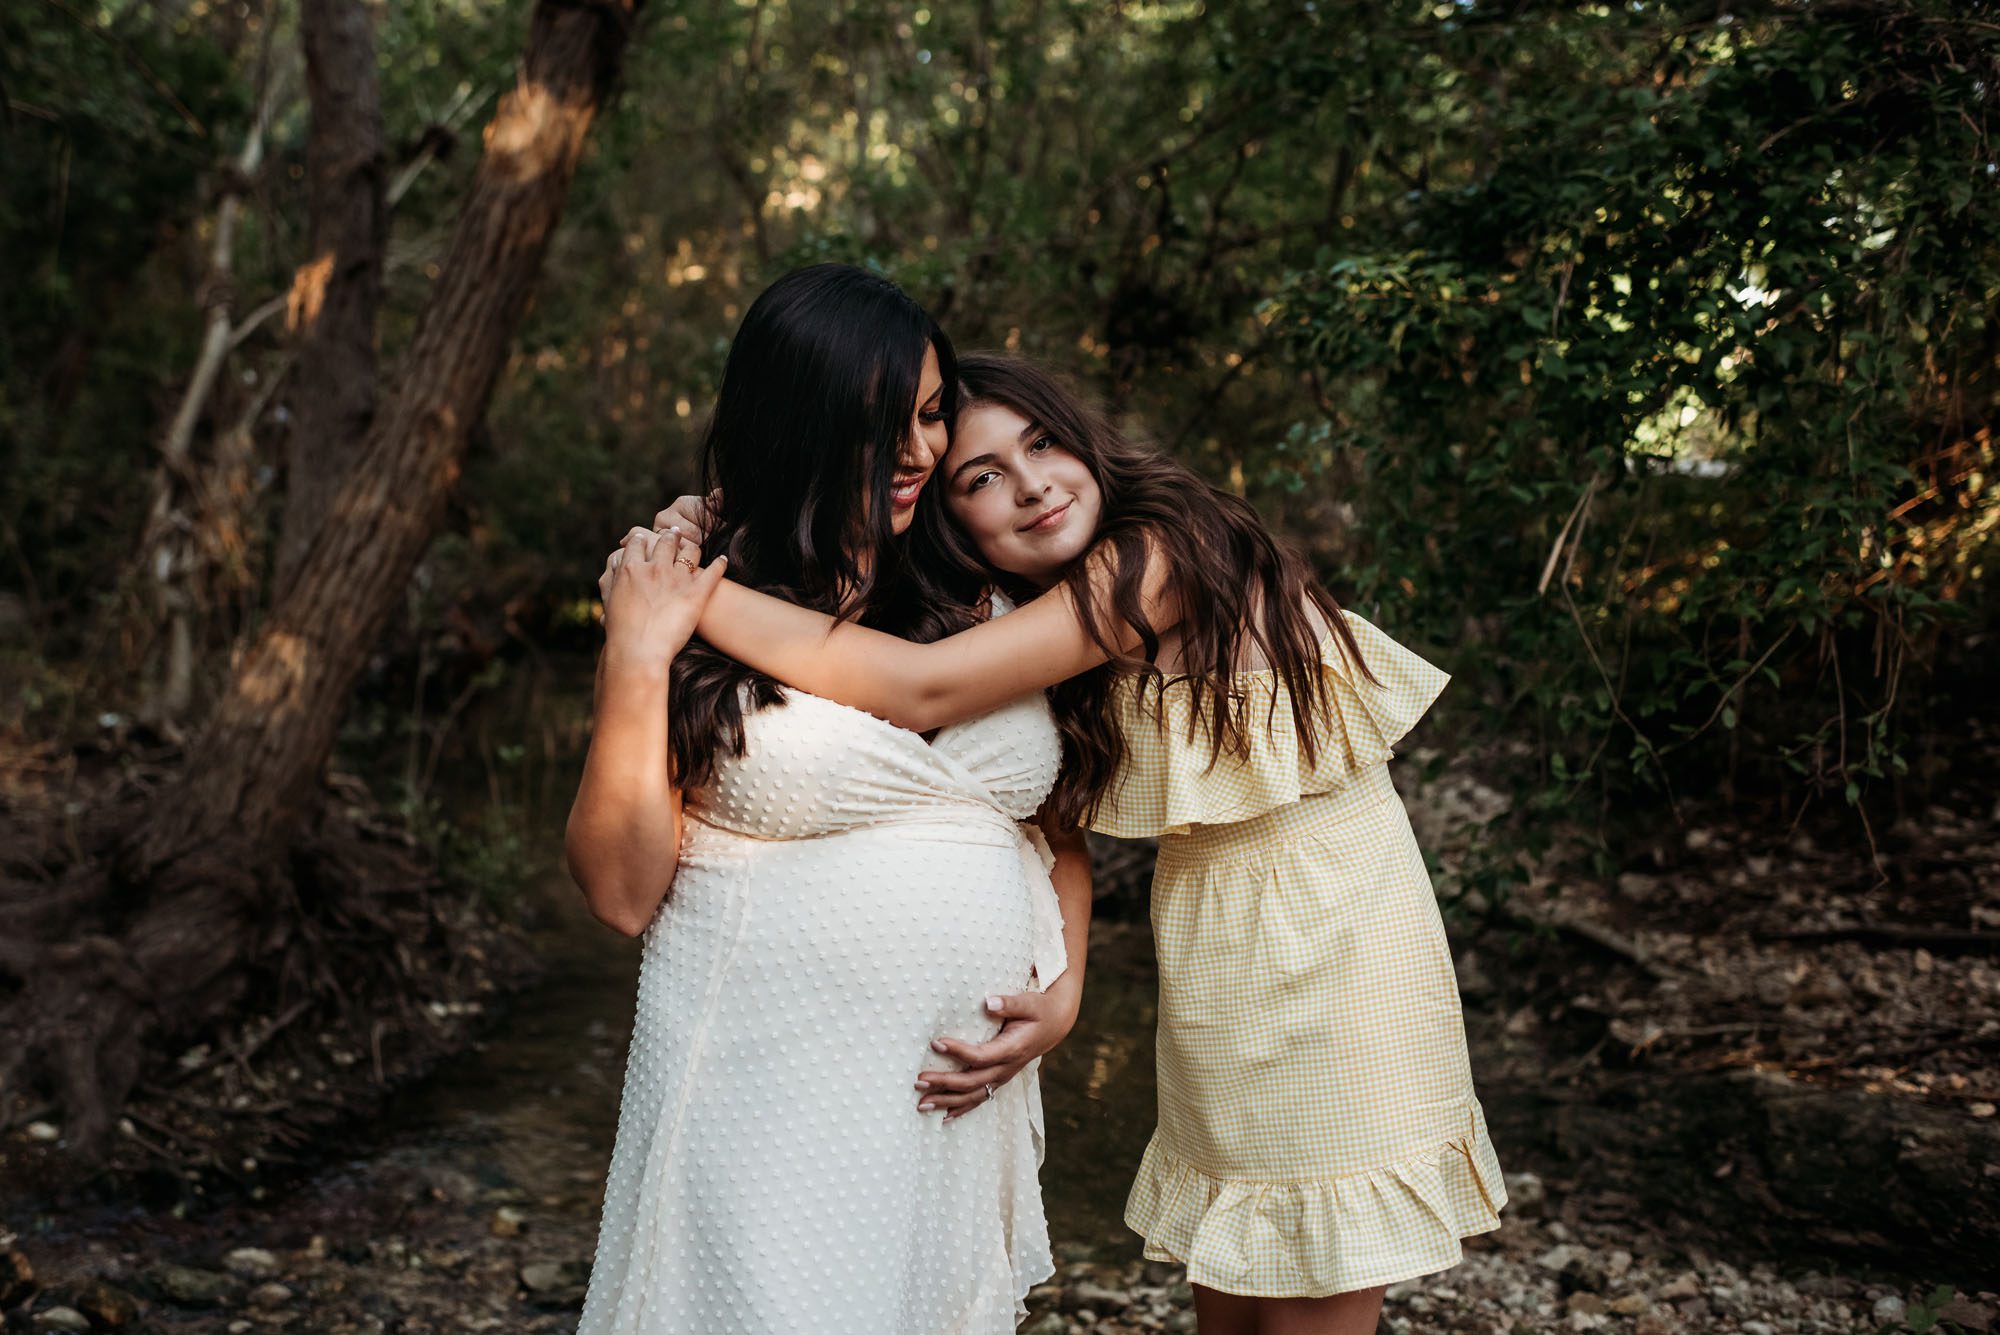 Expectant mother hugging daughter, San Antonio Maternity Photographer